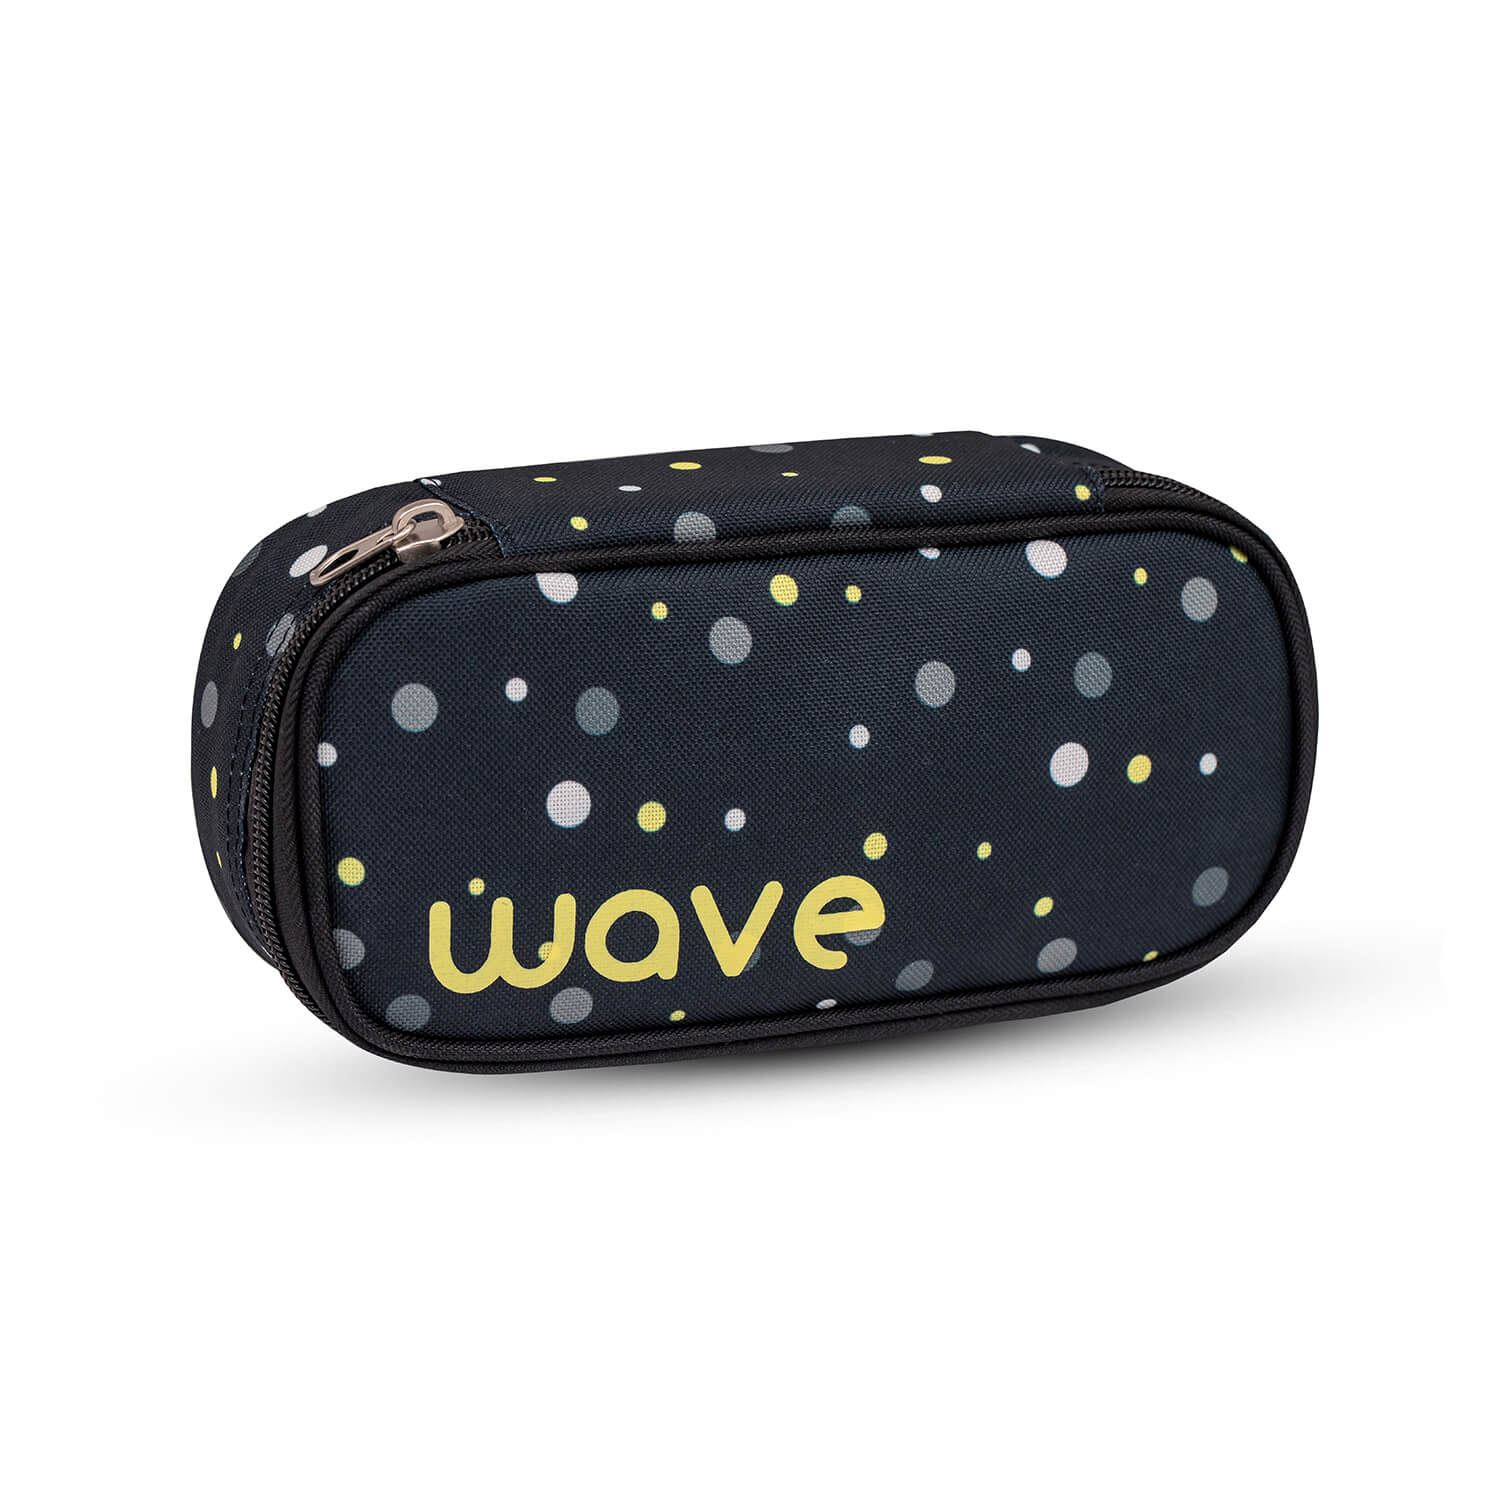 Wave Black and Yellow Dots Schlamperbox